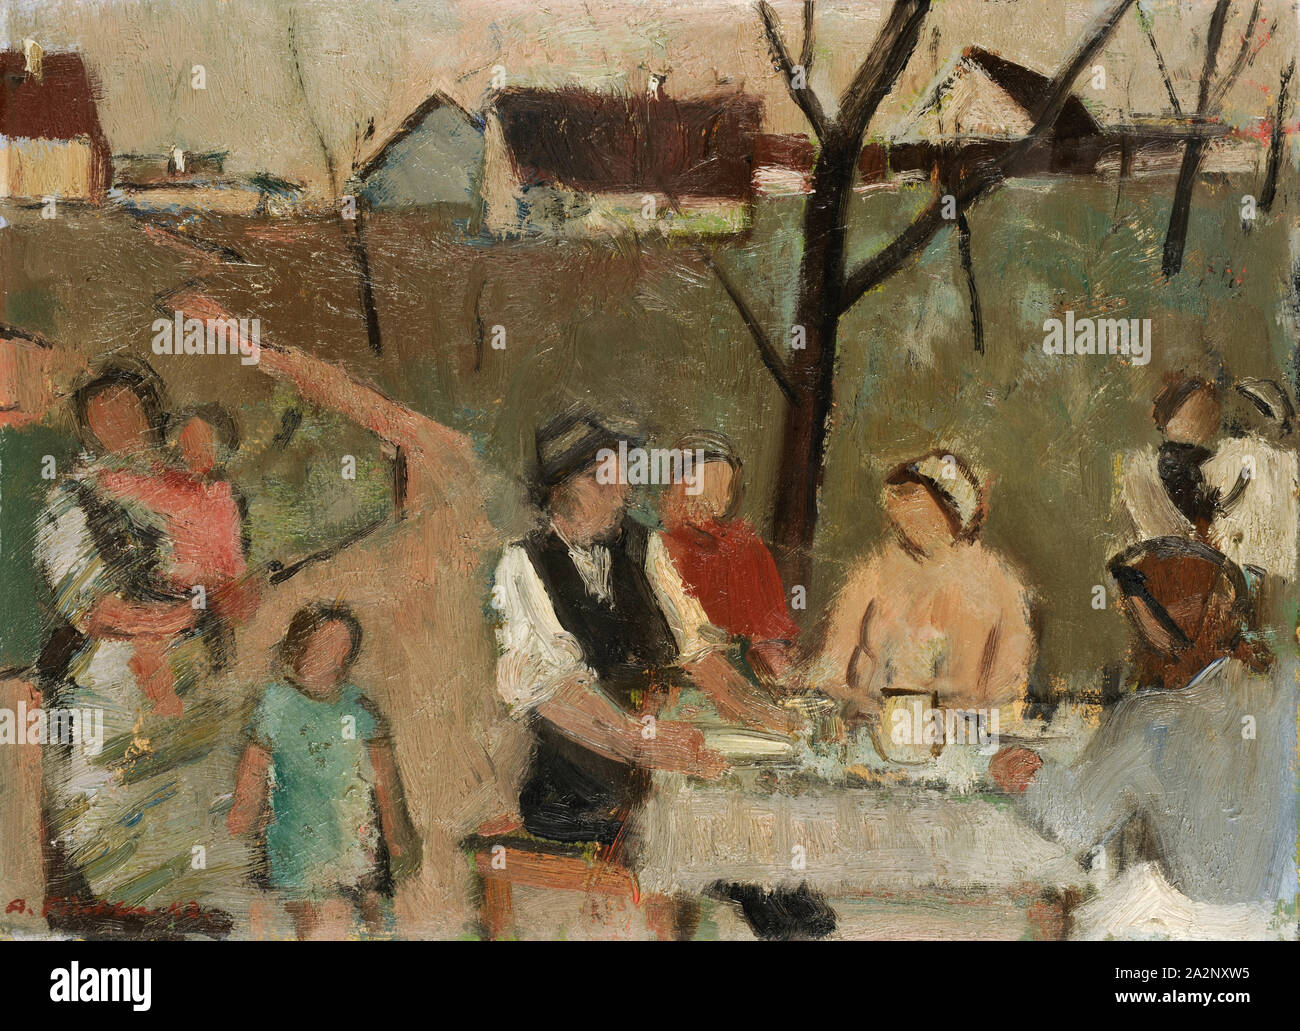 Family at the table in the open air, 1943, oil on board, 25.3 x 34.8 cm, Signed and dated lower left: A. Fiechter 43., Arnold Fiechter, Sissach/Baselland 1879–1943 Basel Stock Photo